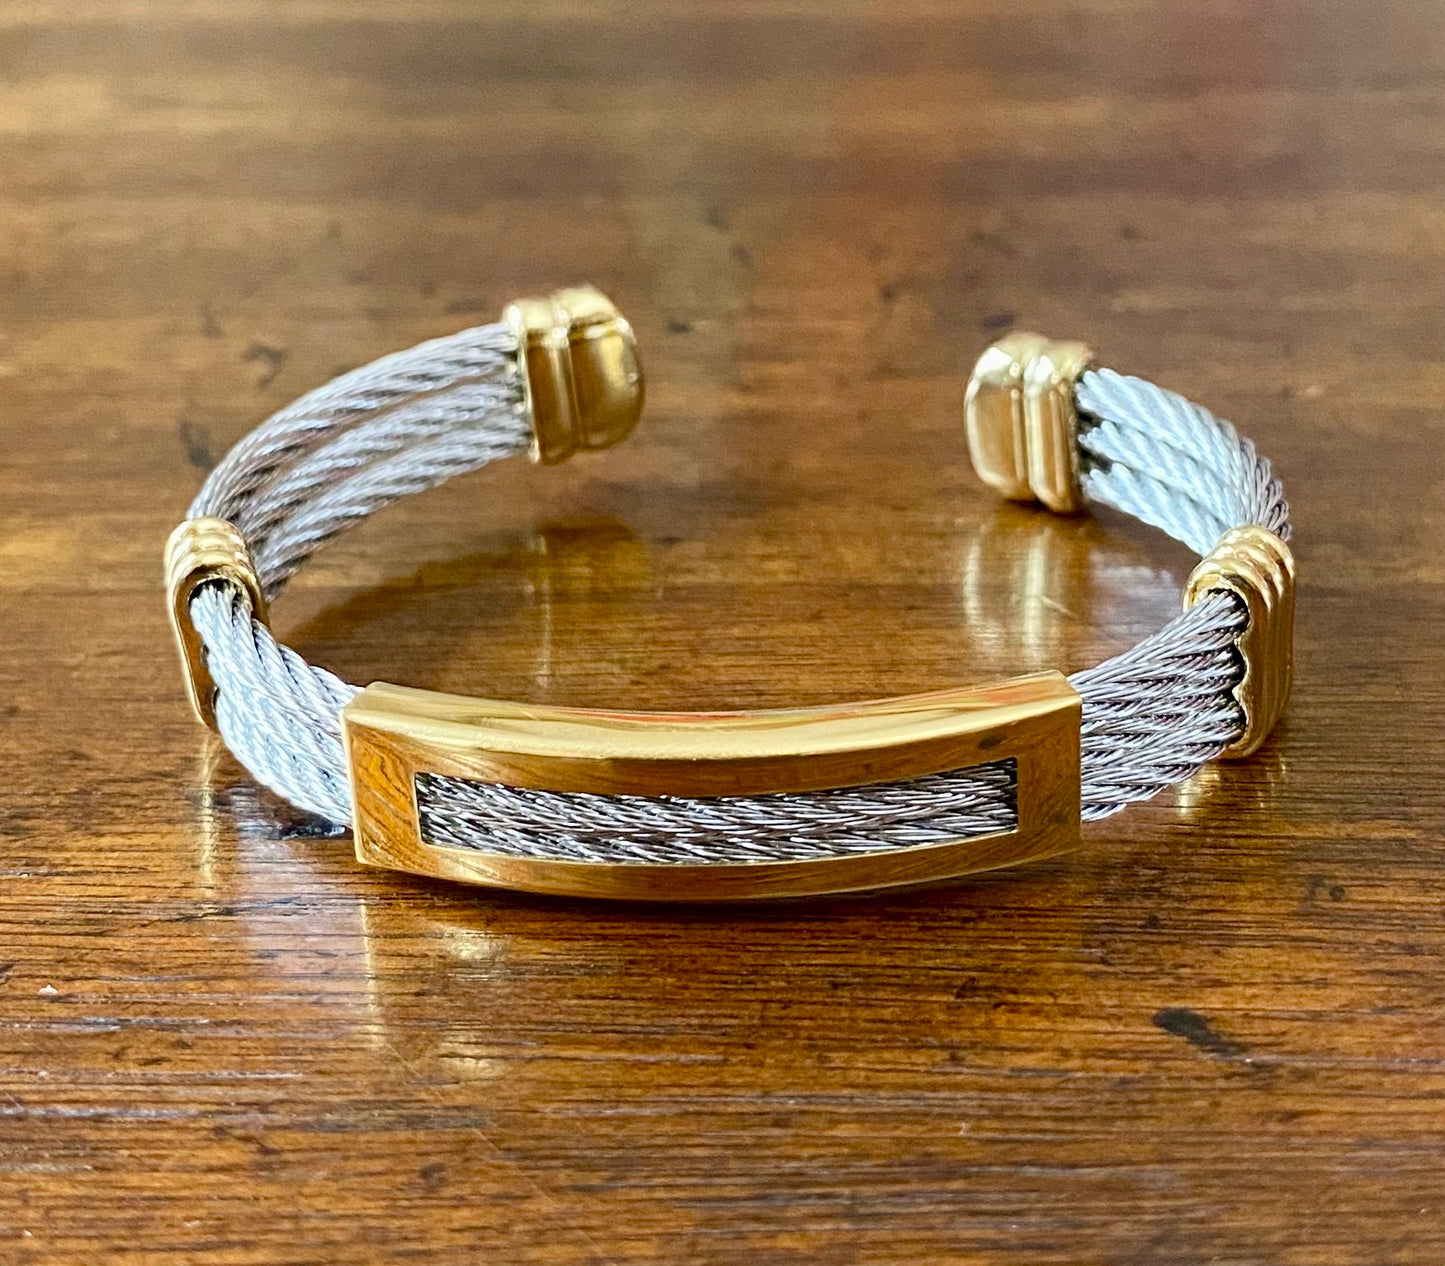 Ladies' Gold and Stainless Steel Twisted Cable Cuff